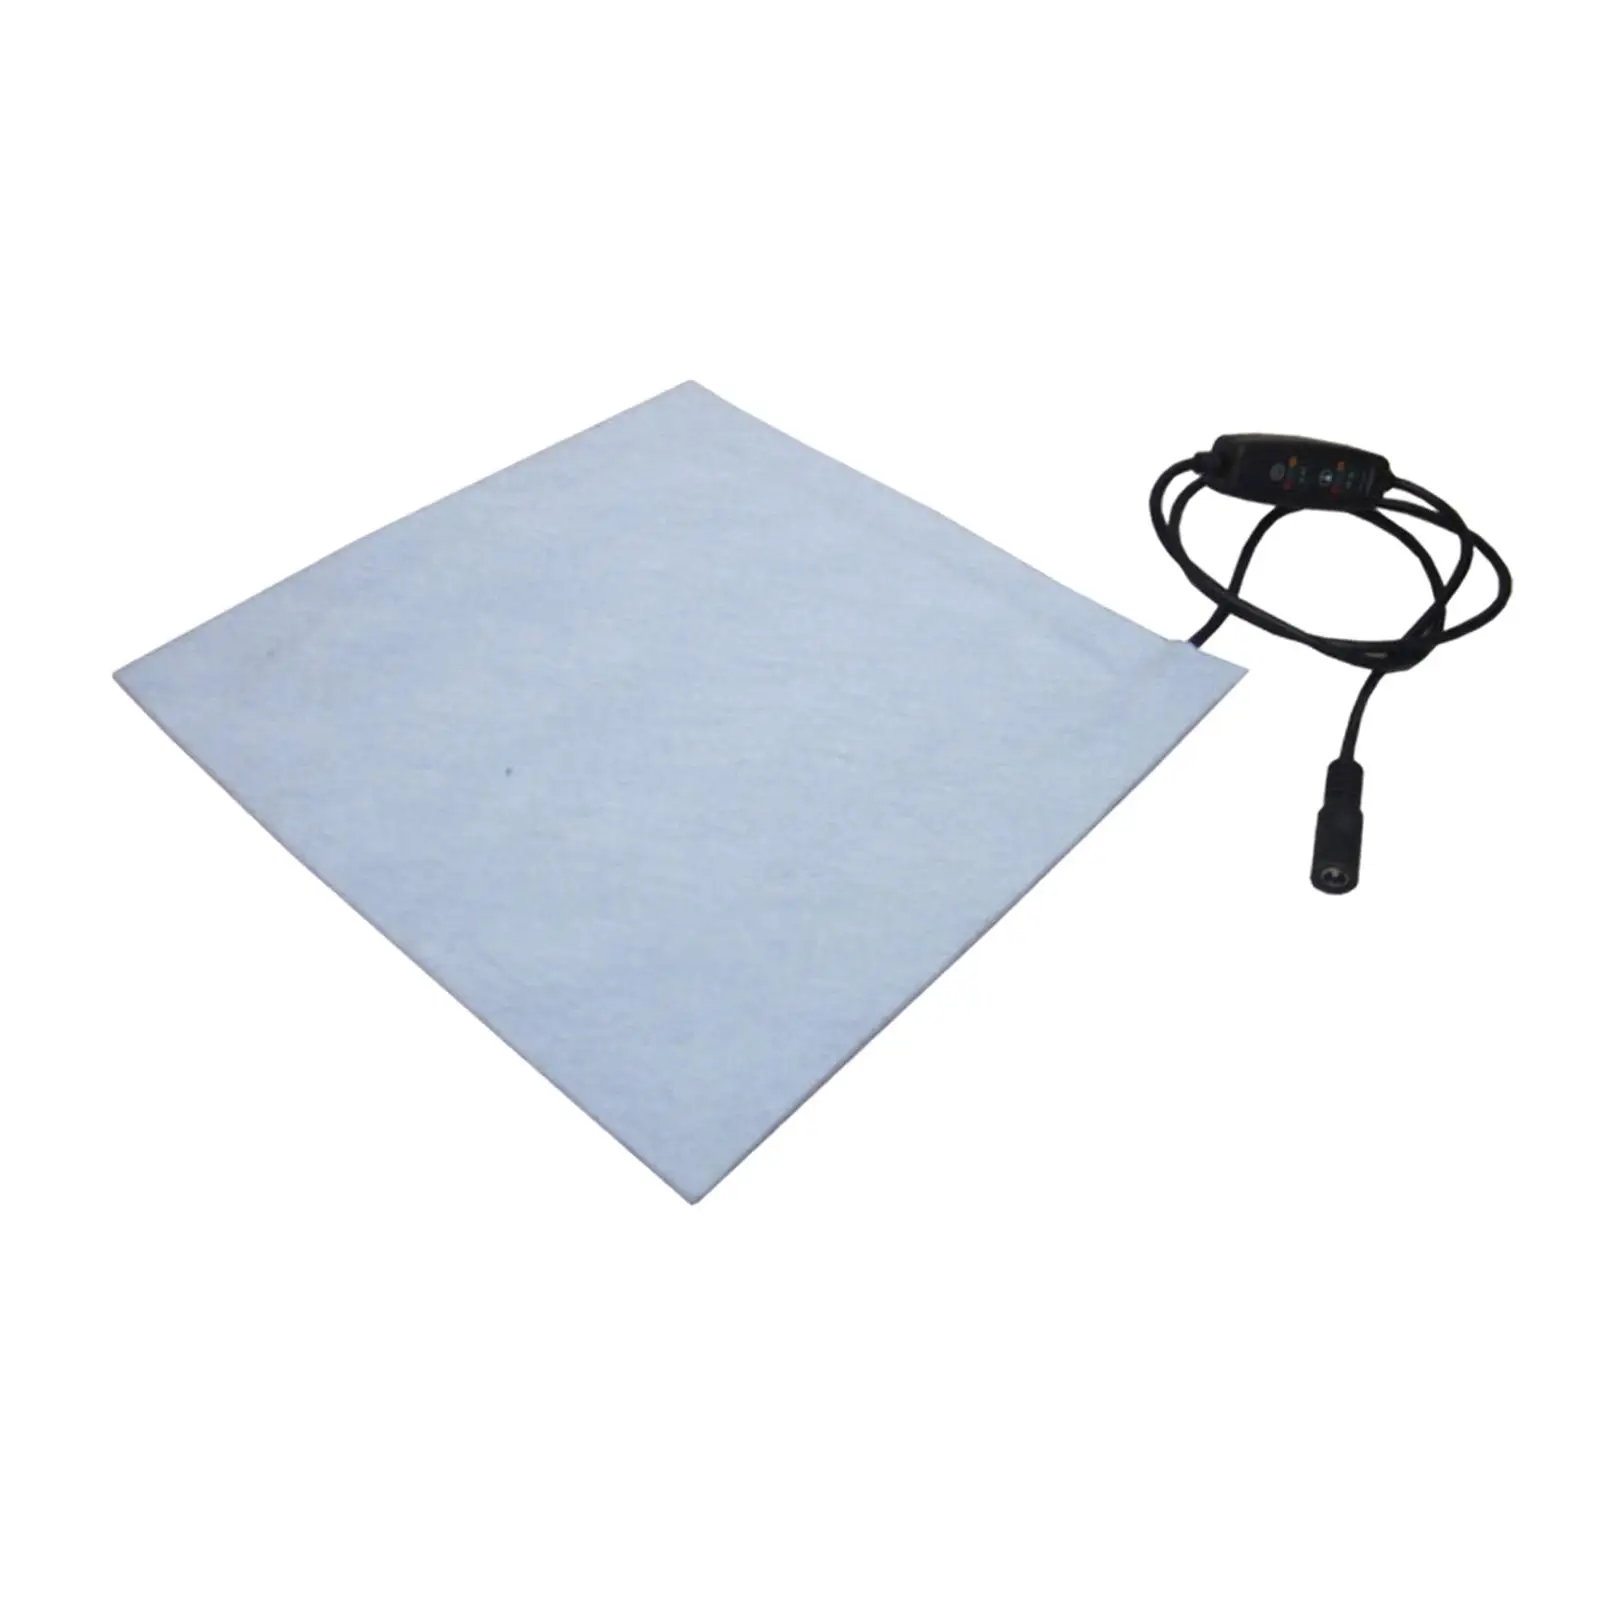 Thermostat Heat Preservation Plate Adult Portable DIY Thermal Heater Pad for Lunch Bag Food Bag Milk Bottle Lunch Box School